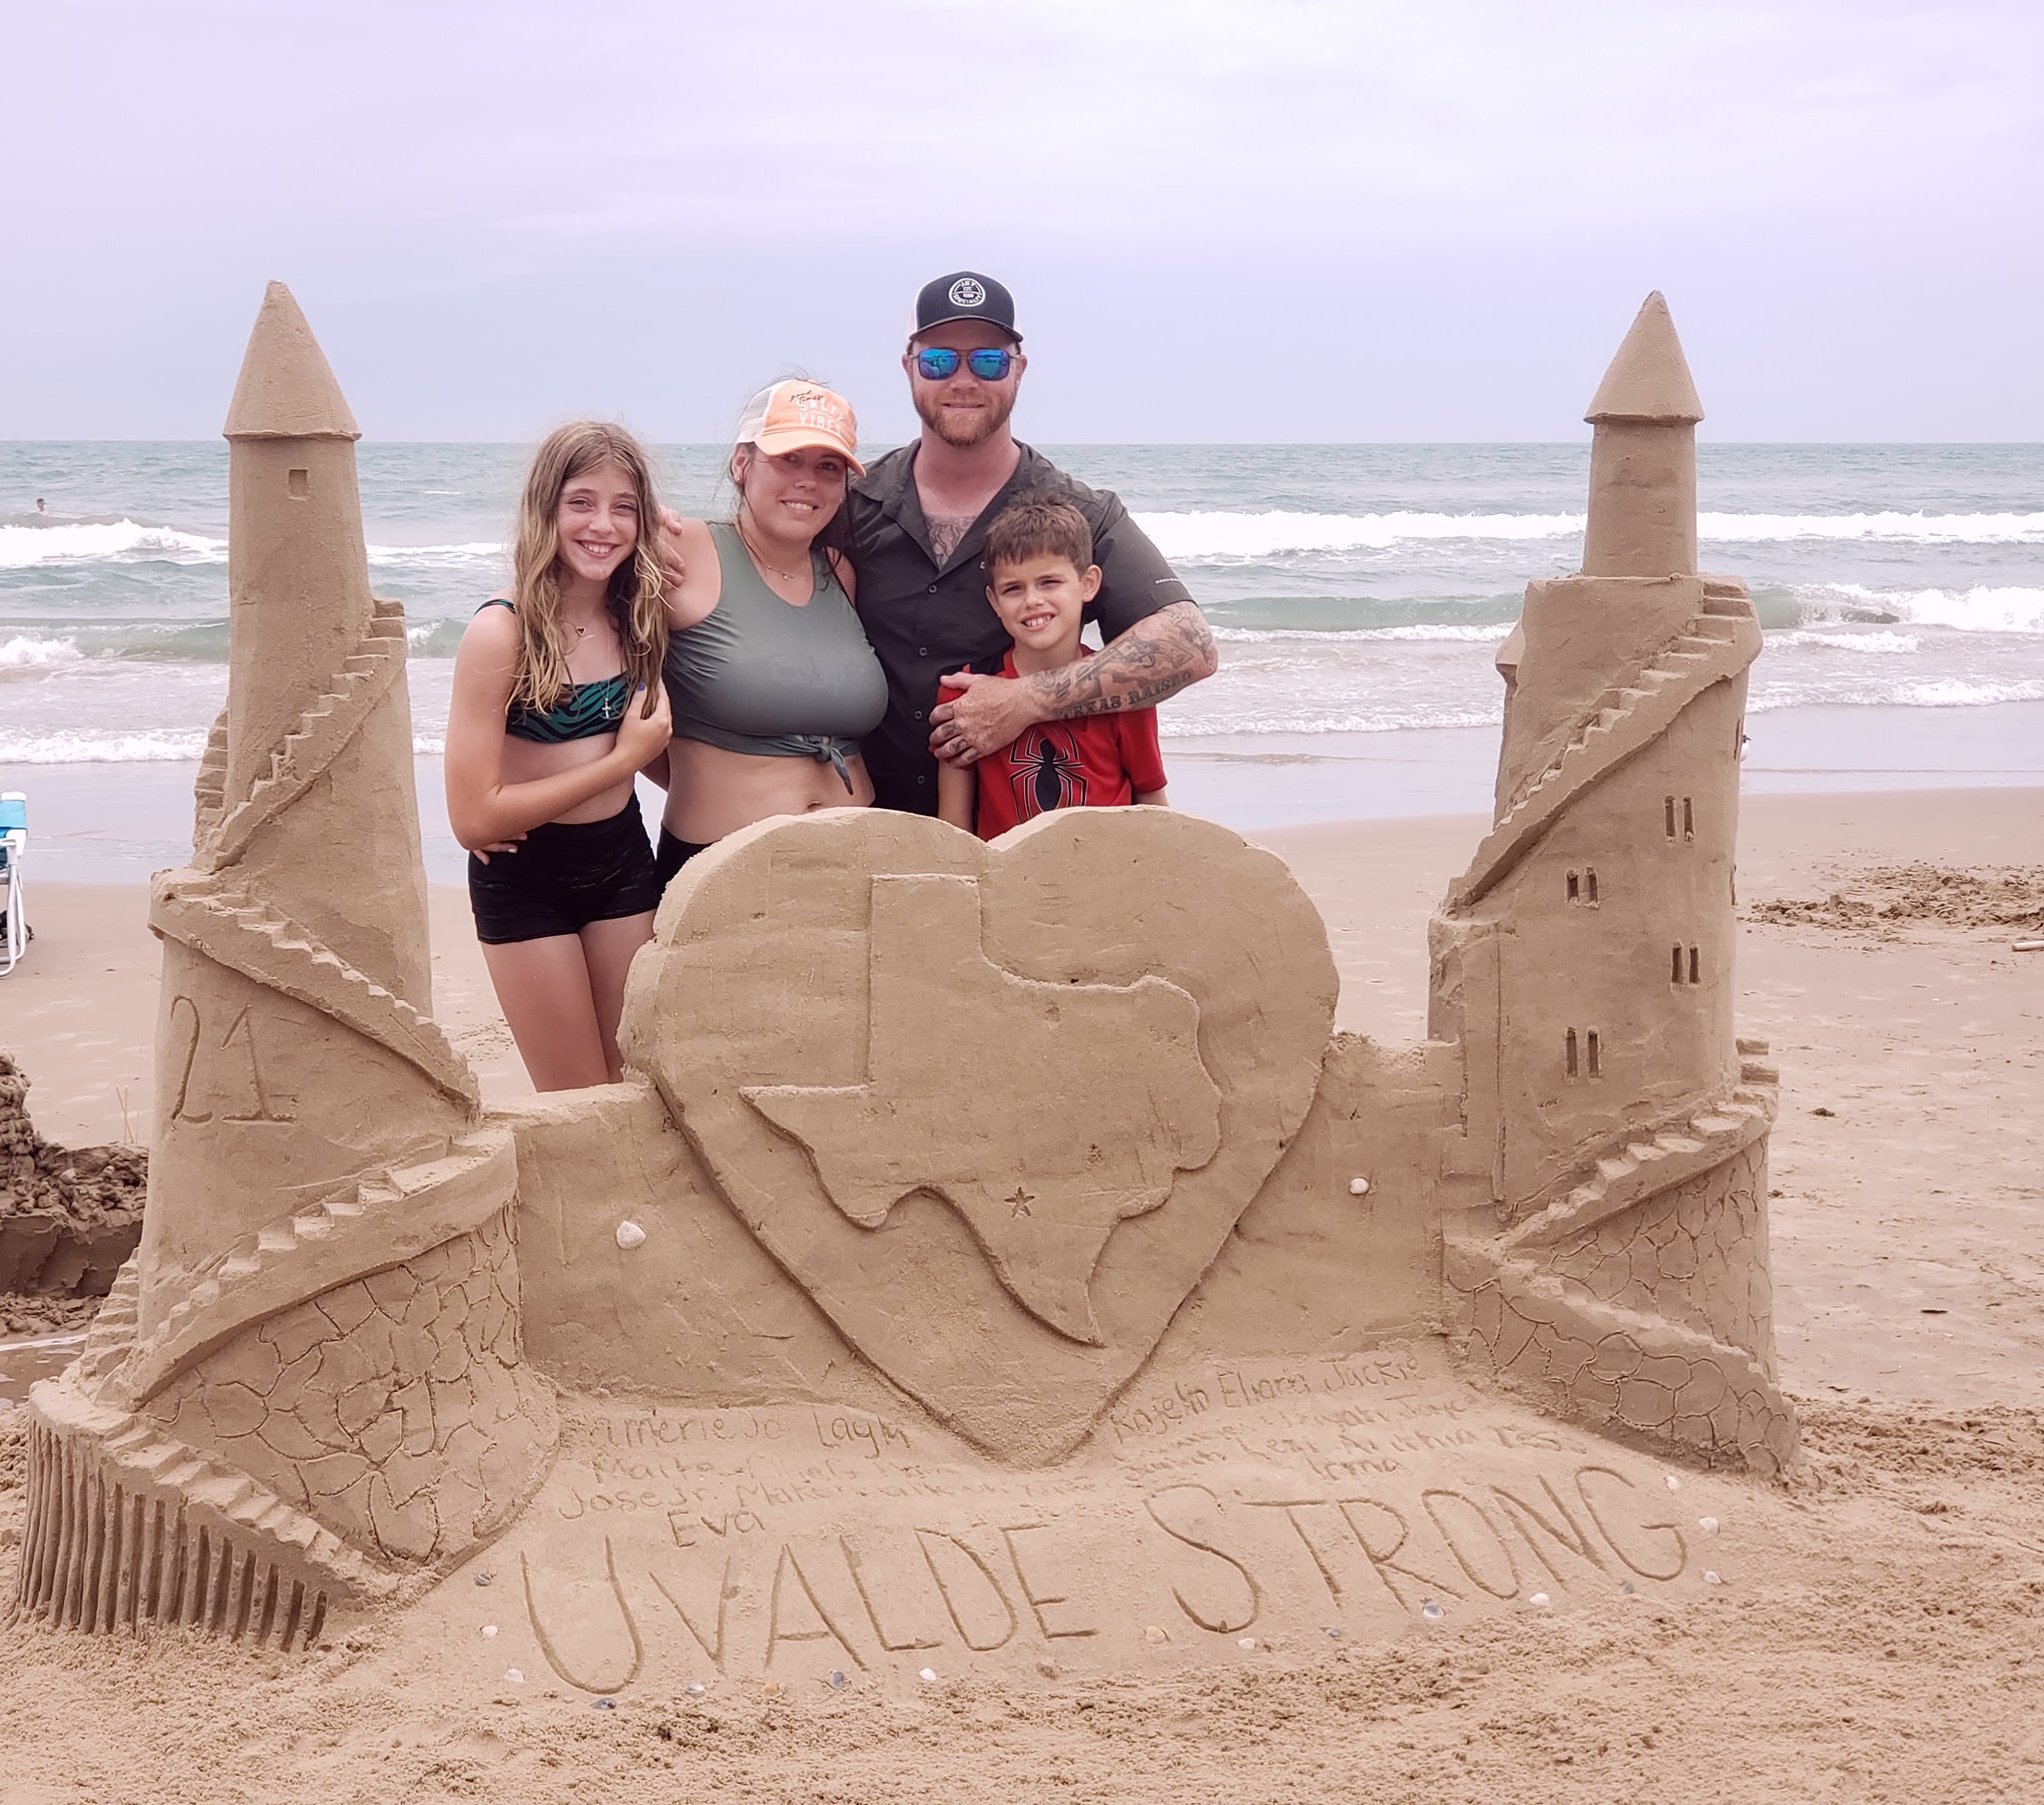 Students build sand castle with prominent message